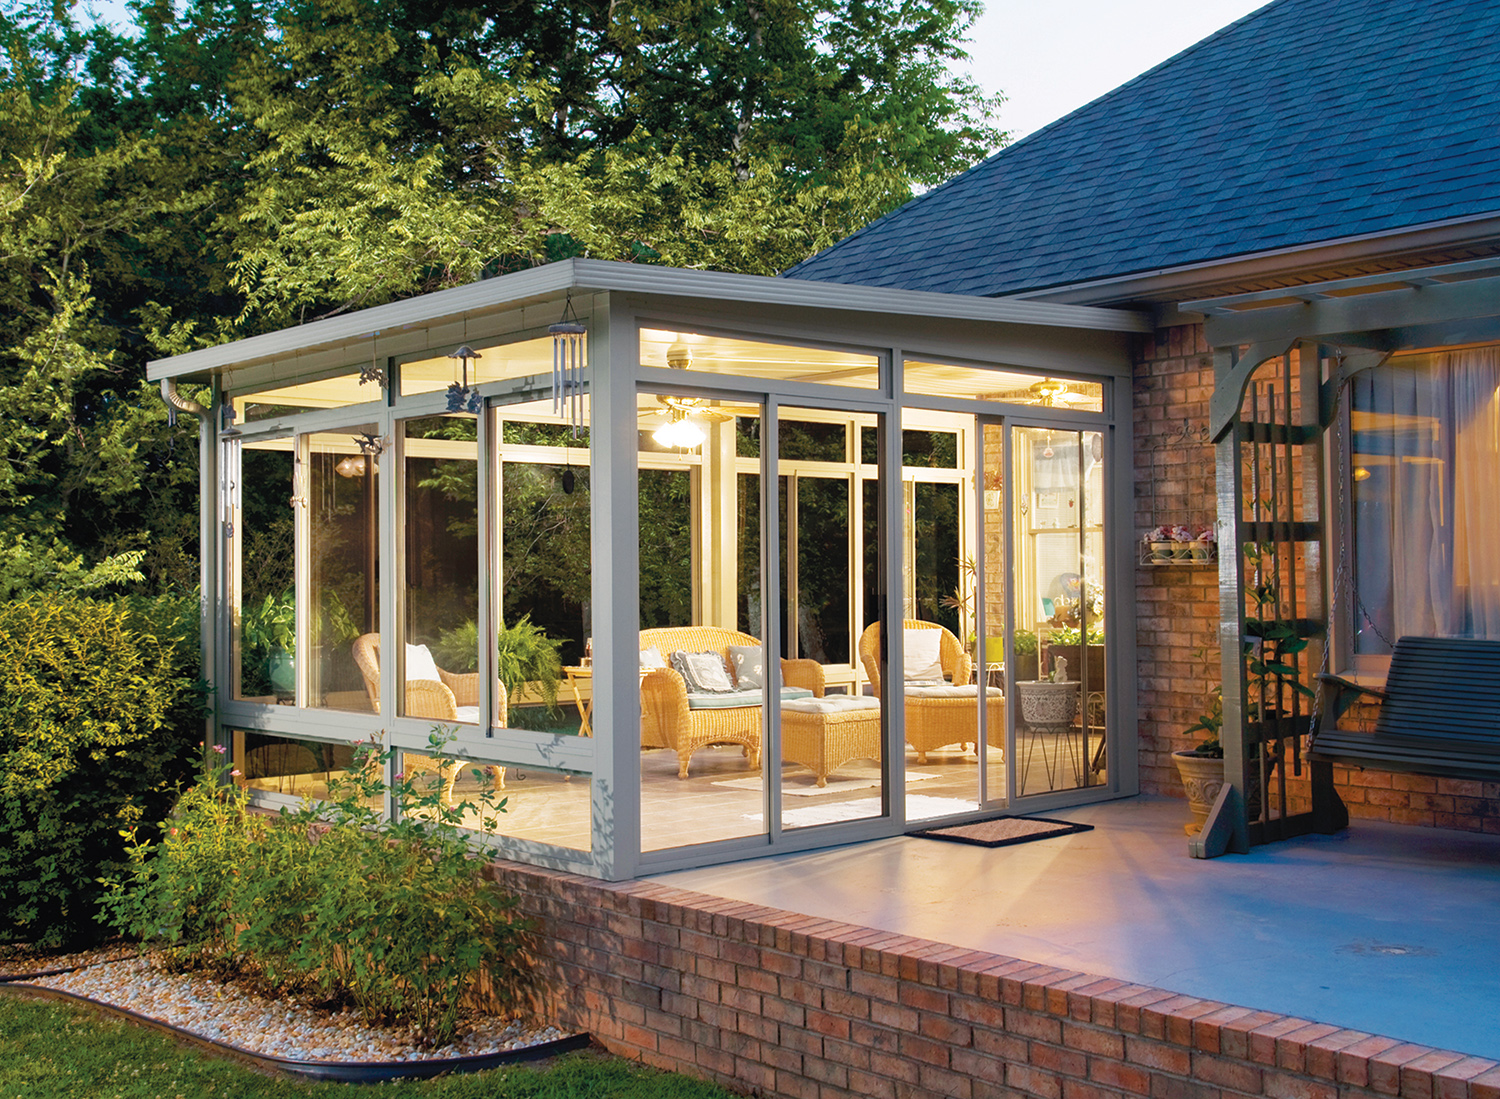 How to build a sunroom addition